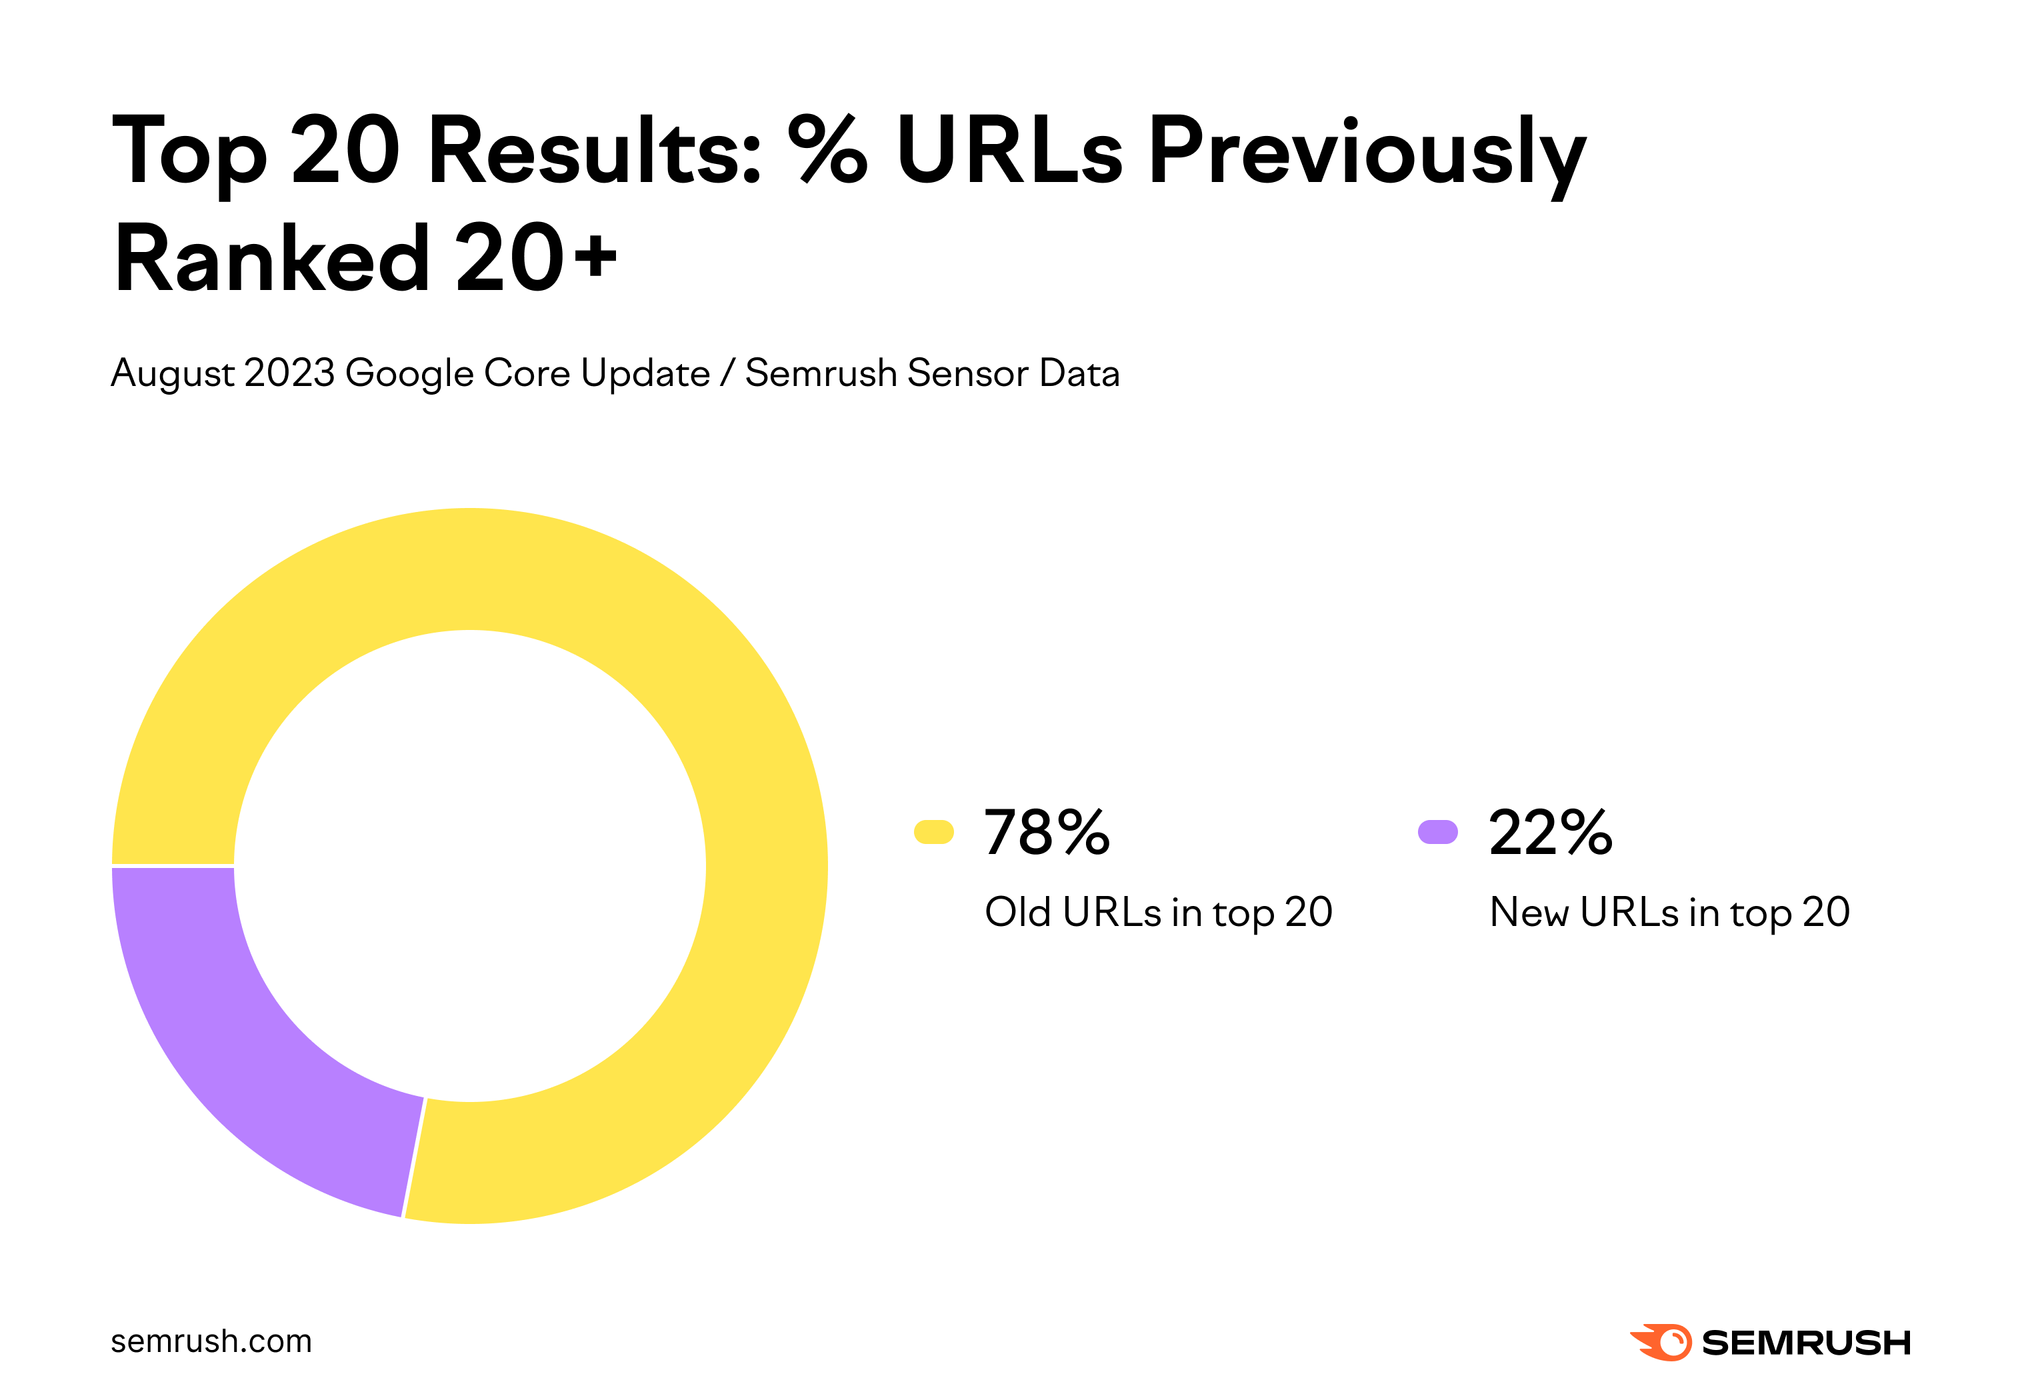 Graph showing the percentage of URLs that previously ranked 20 or above that moved to the top 20 during the August 2023 core update.